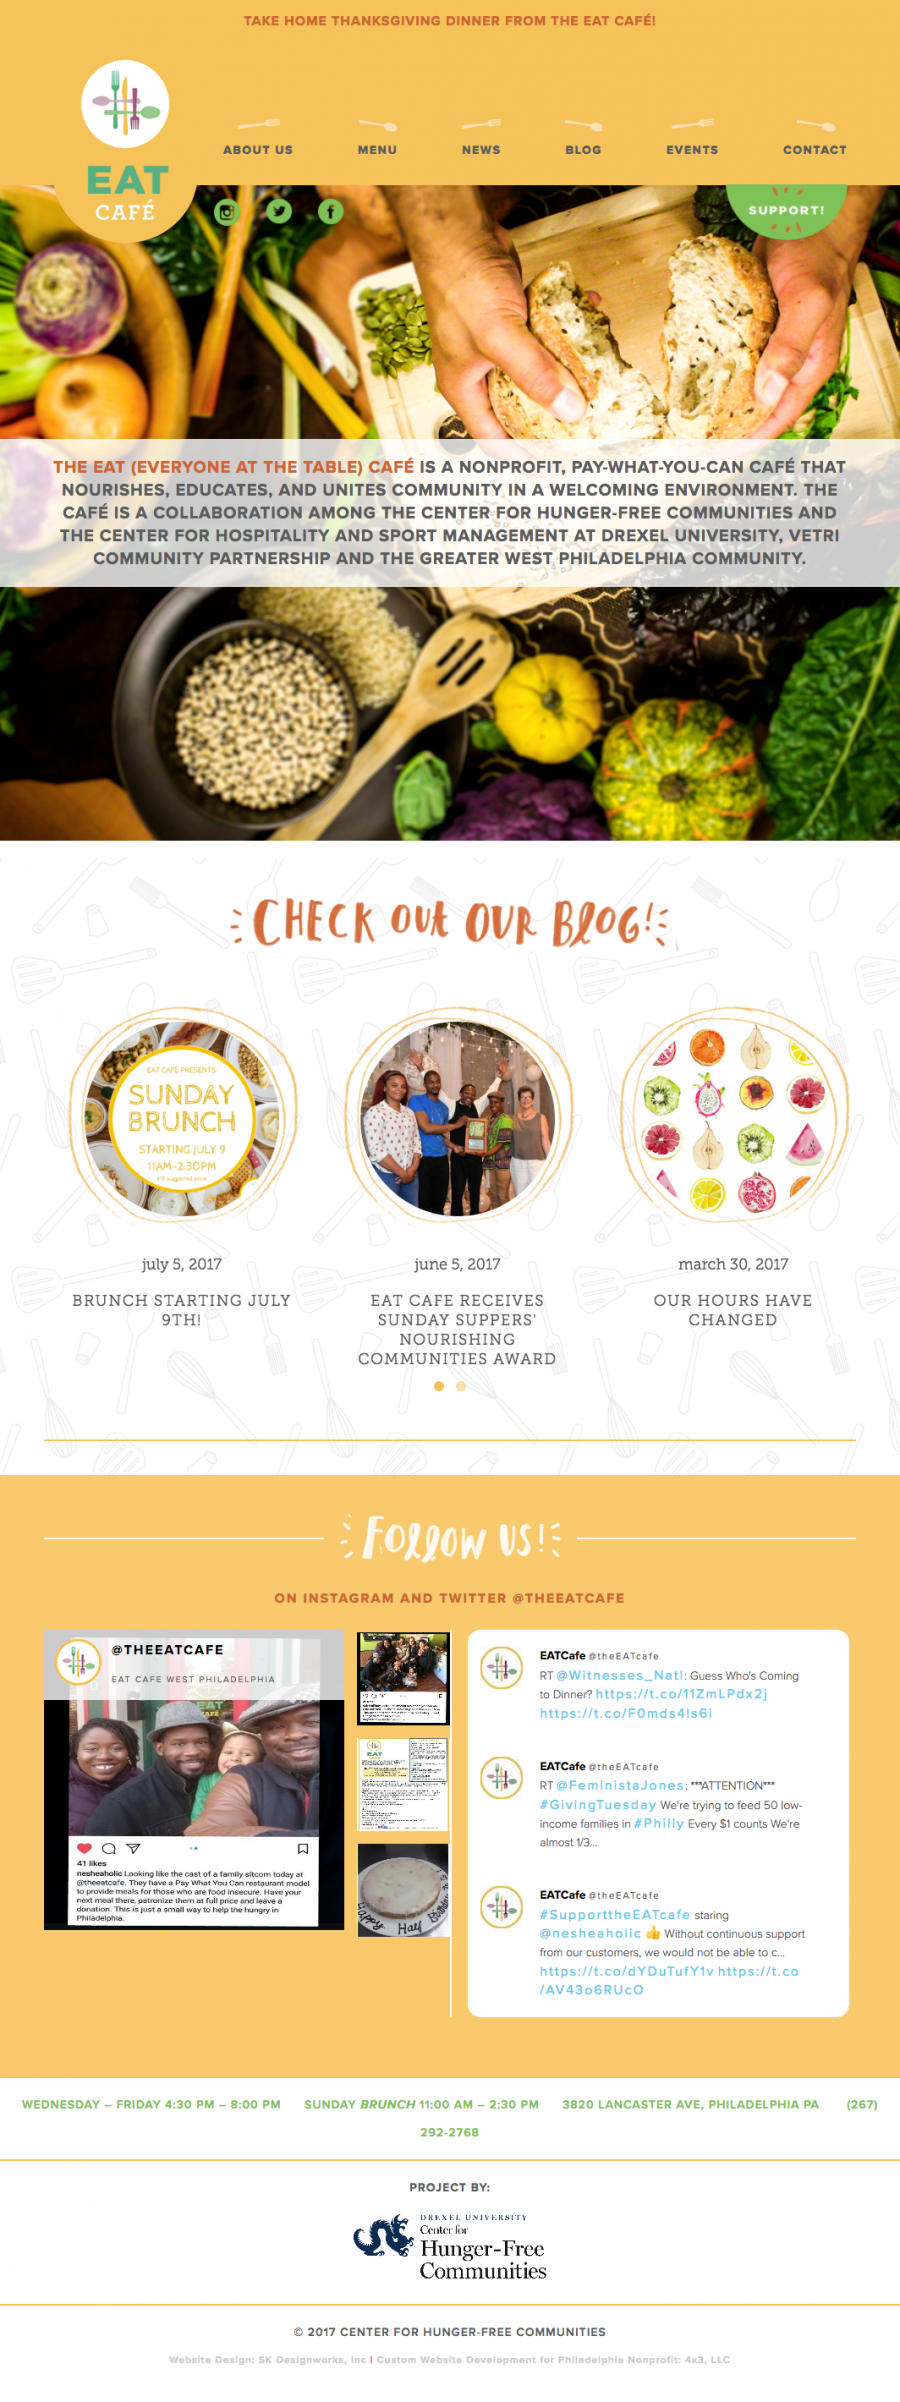 Homepage featuring news, menu items, upcoming events and live social media feeds